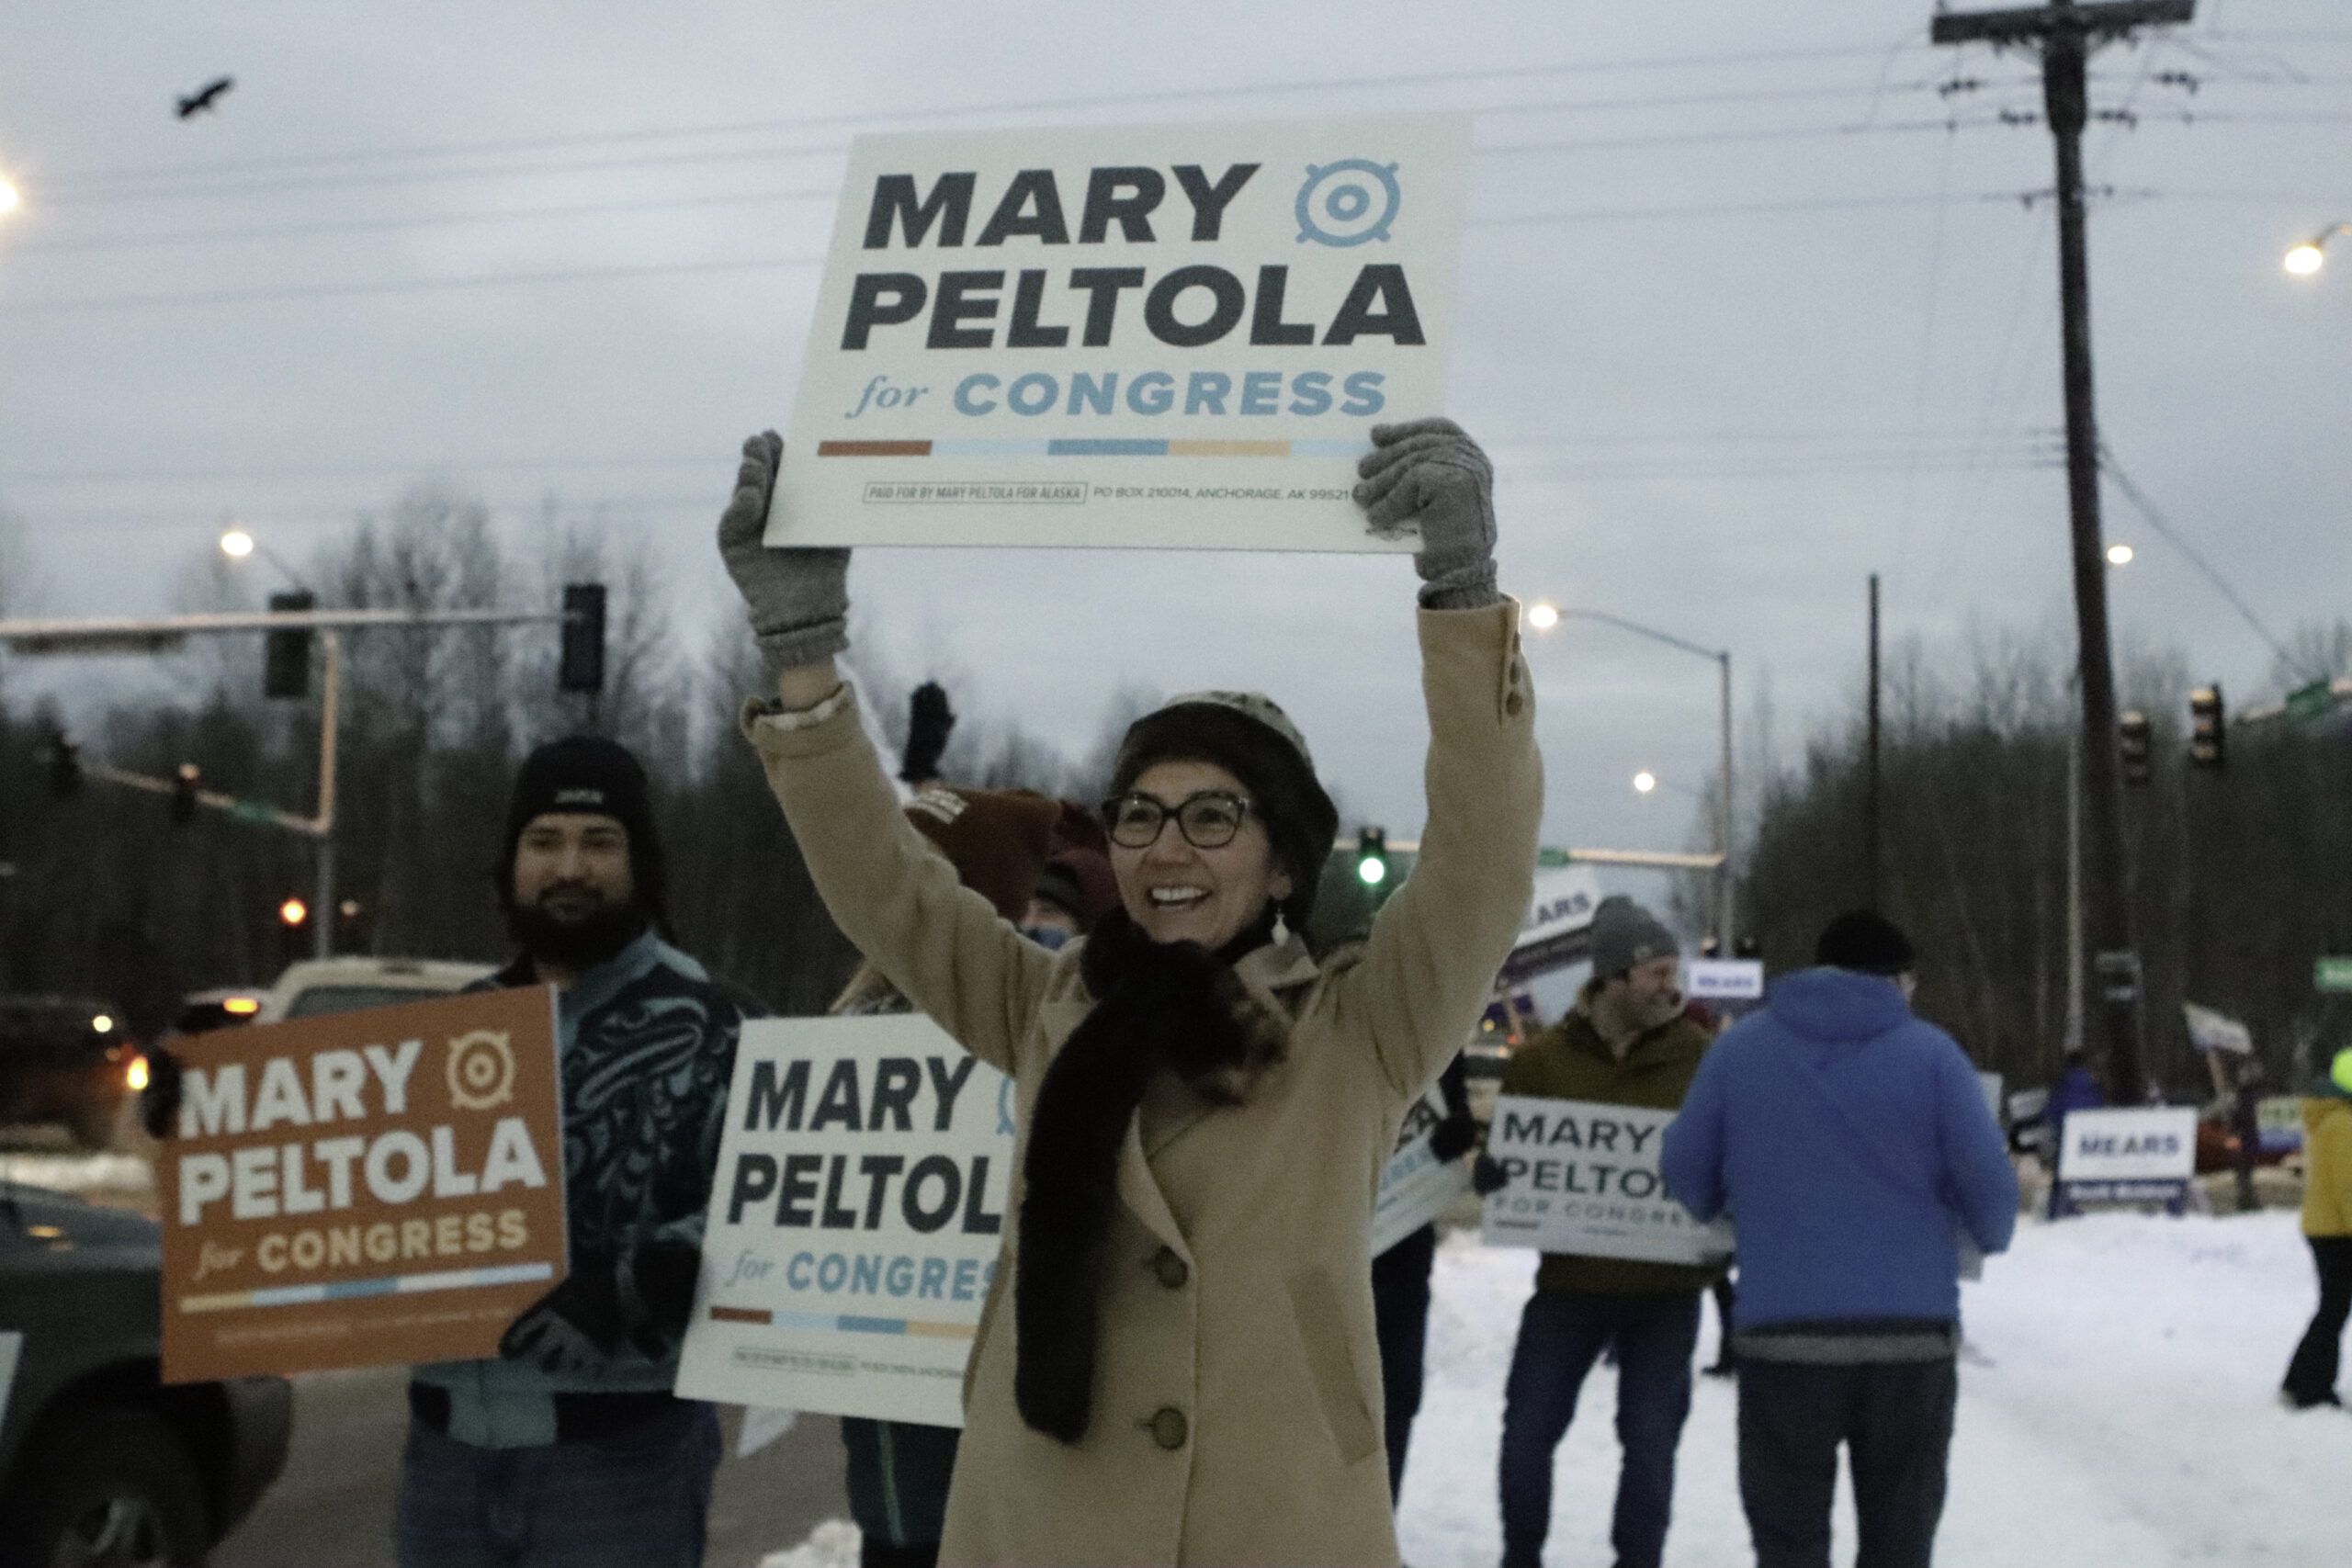 A woman holds a "Mary Peltola for Congress" sign outside